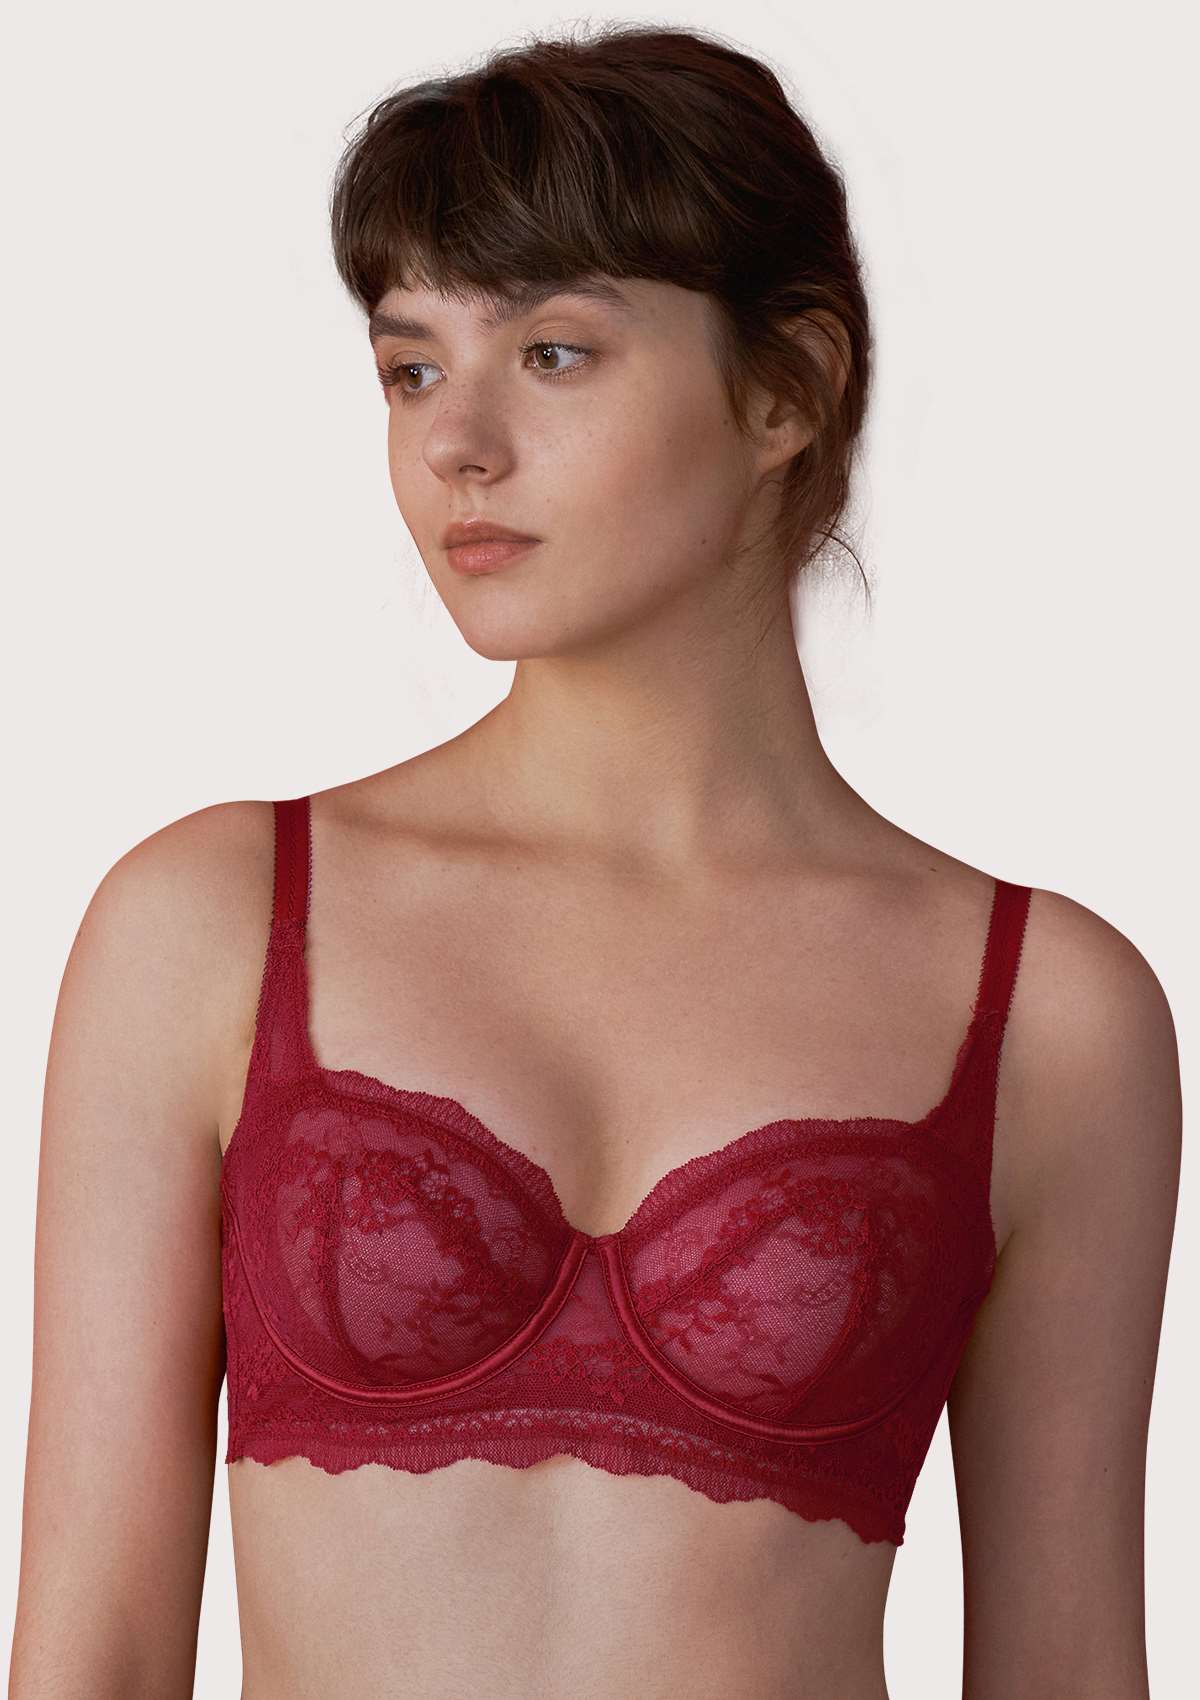 HSIA Floral Lace Unlined Bridal Balconette Bra Set - Supportive Classic - Burgundy / 36 / DDD/F